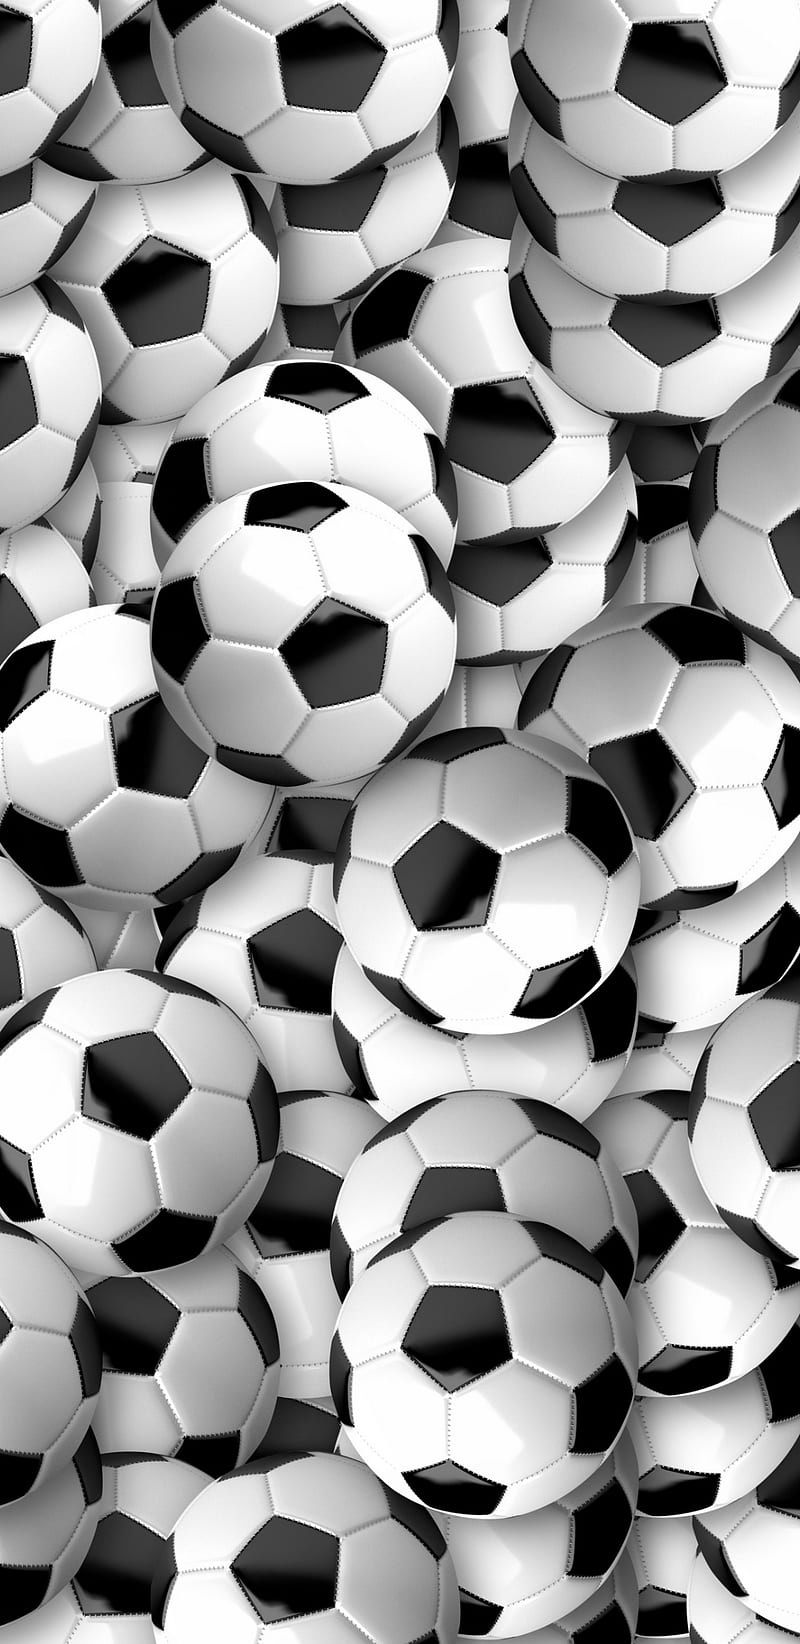 Wallpaper ID 243302  black and white monochrome soccer and football hd 4k  wallpaper free download